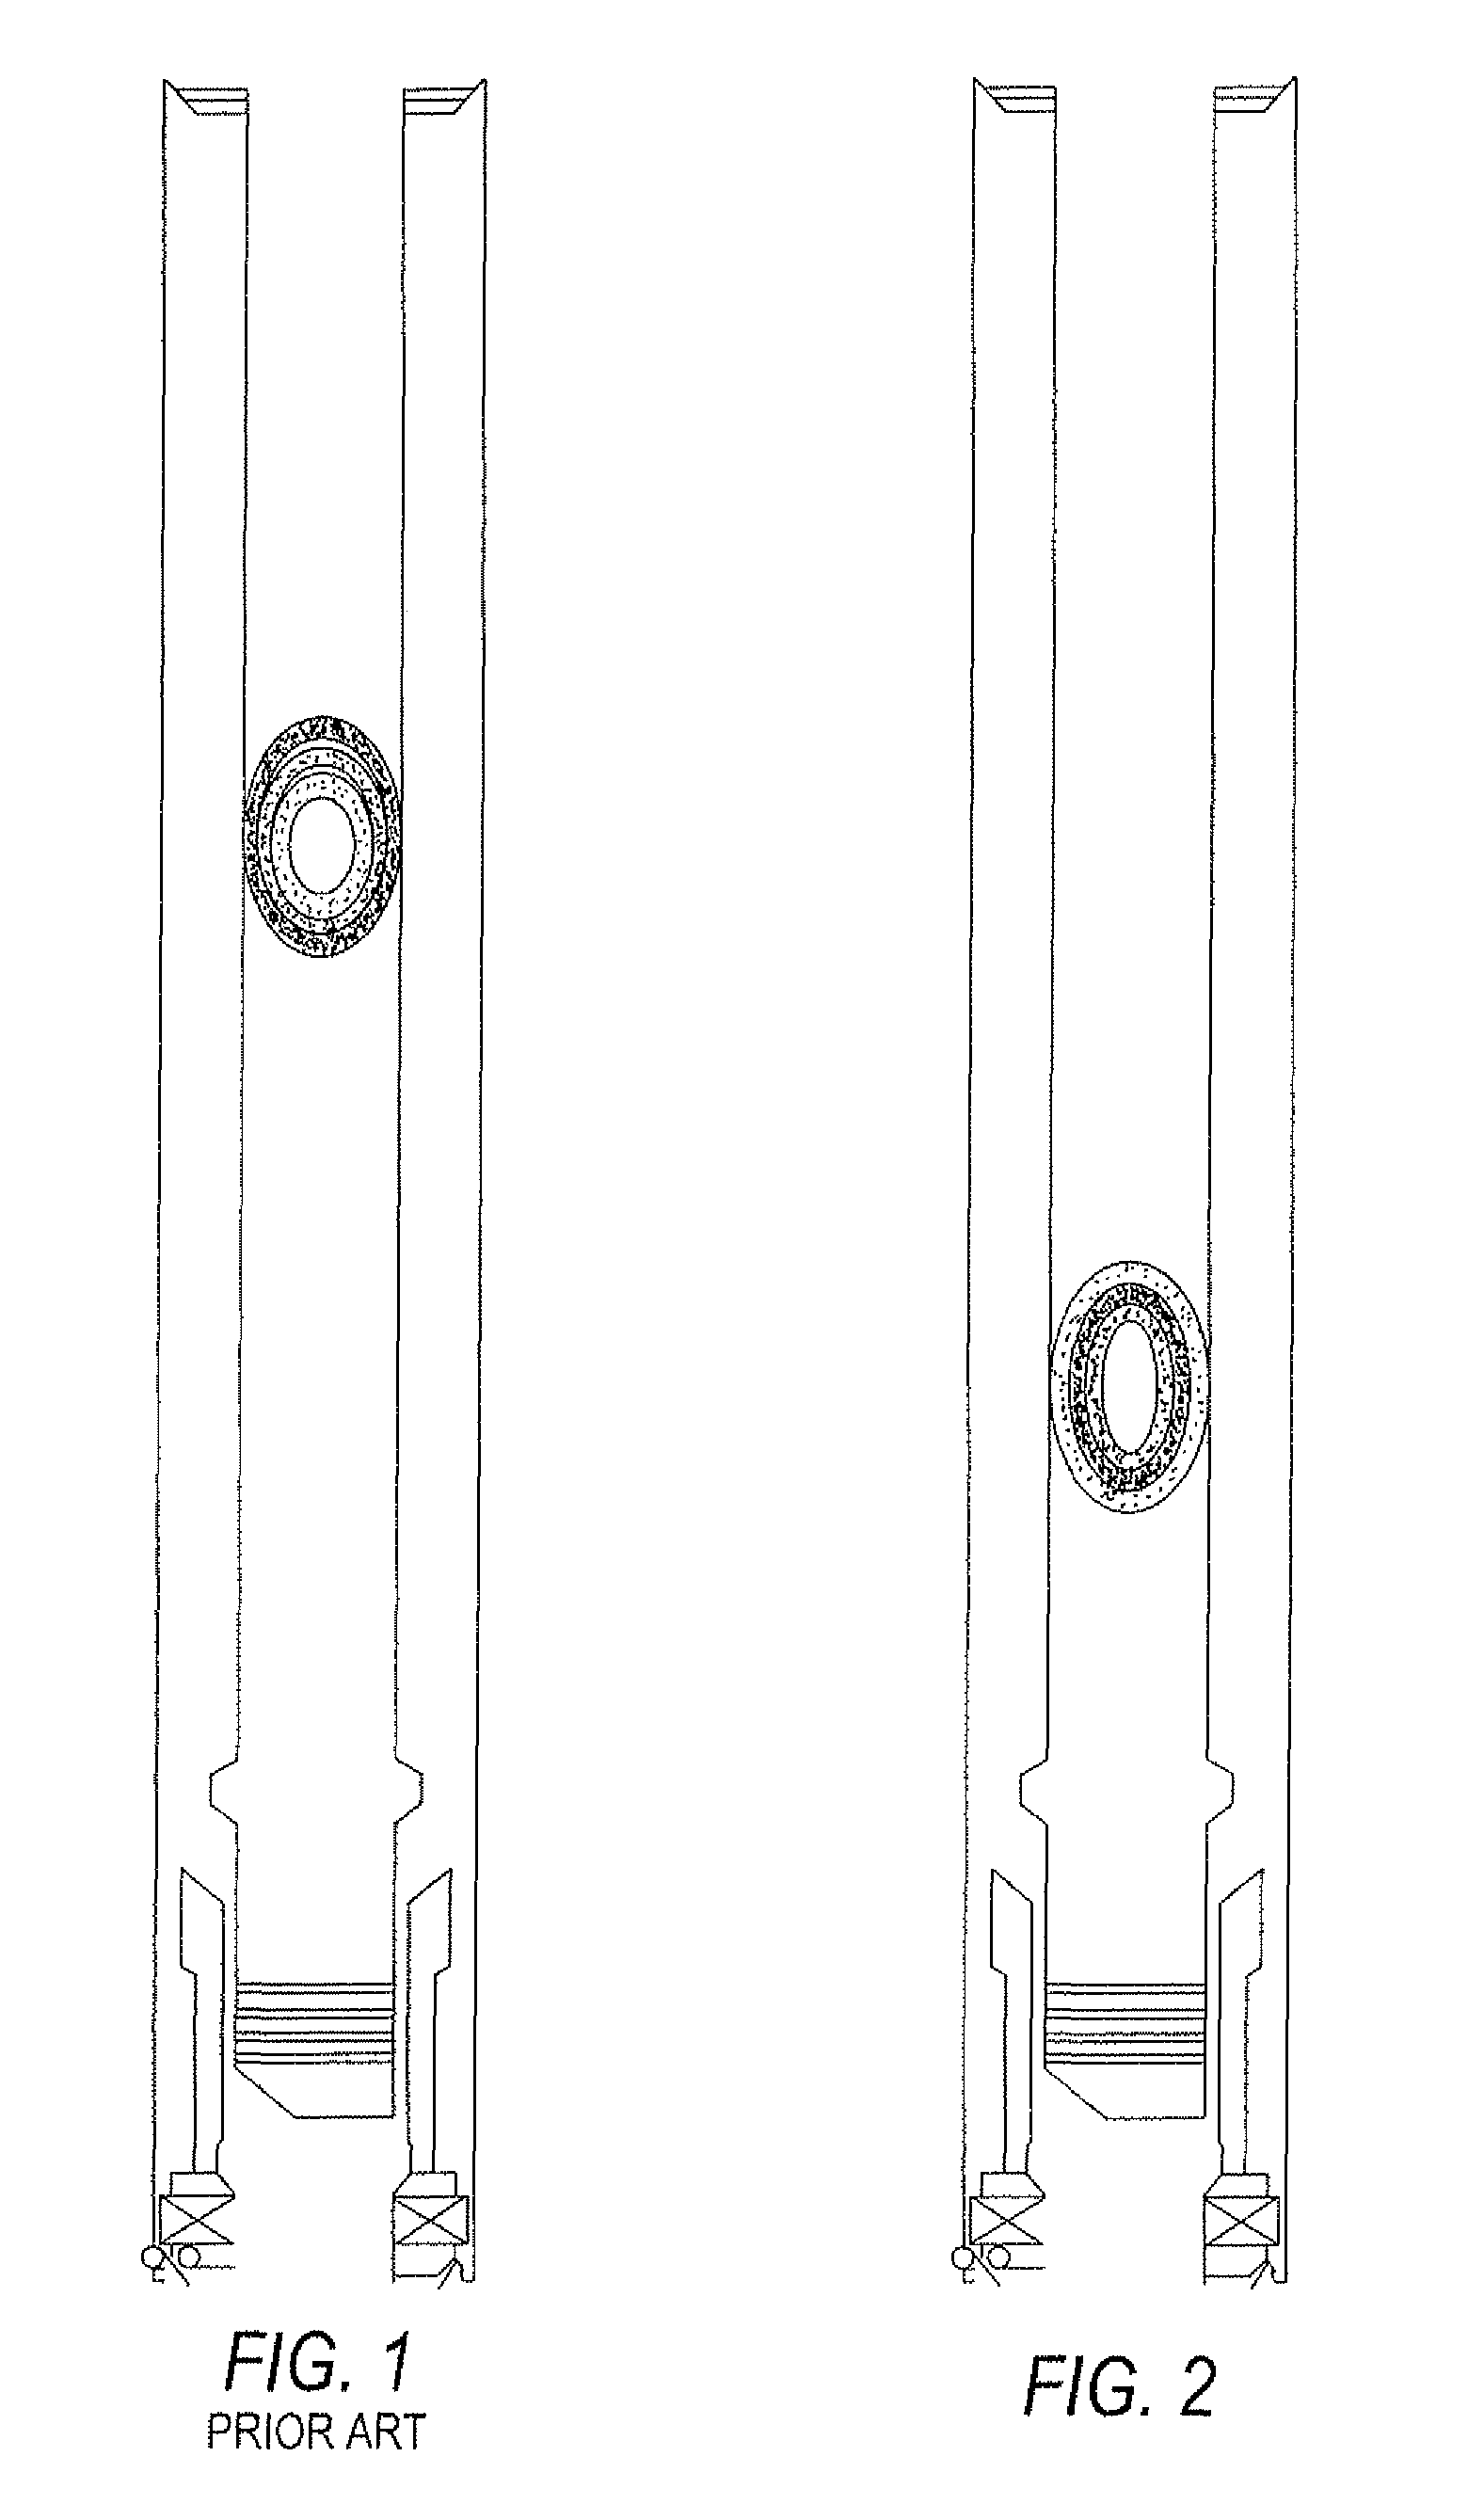 Method of mixing a corrosion inhibitor in an acid-in-oil emulsion